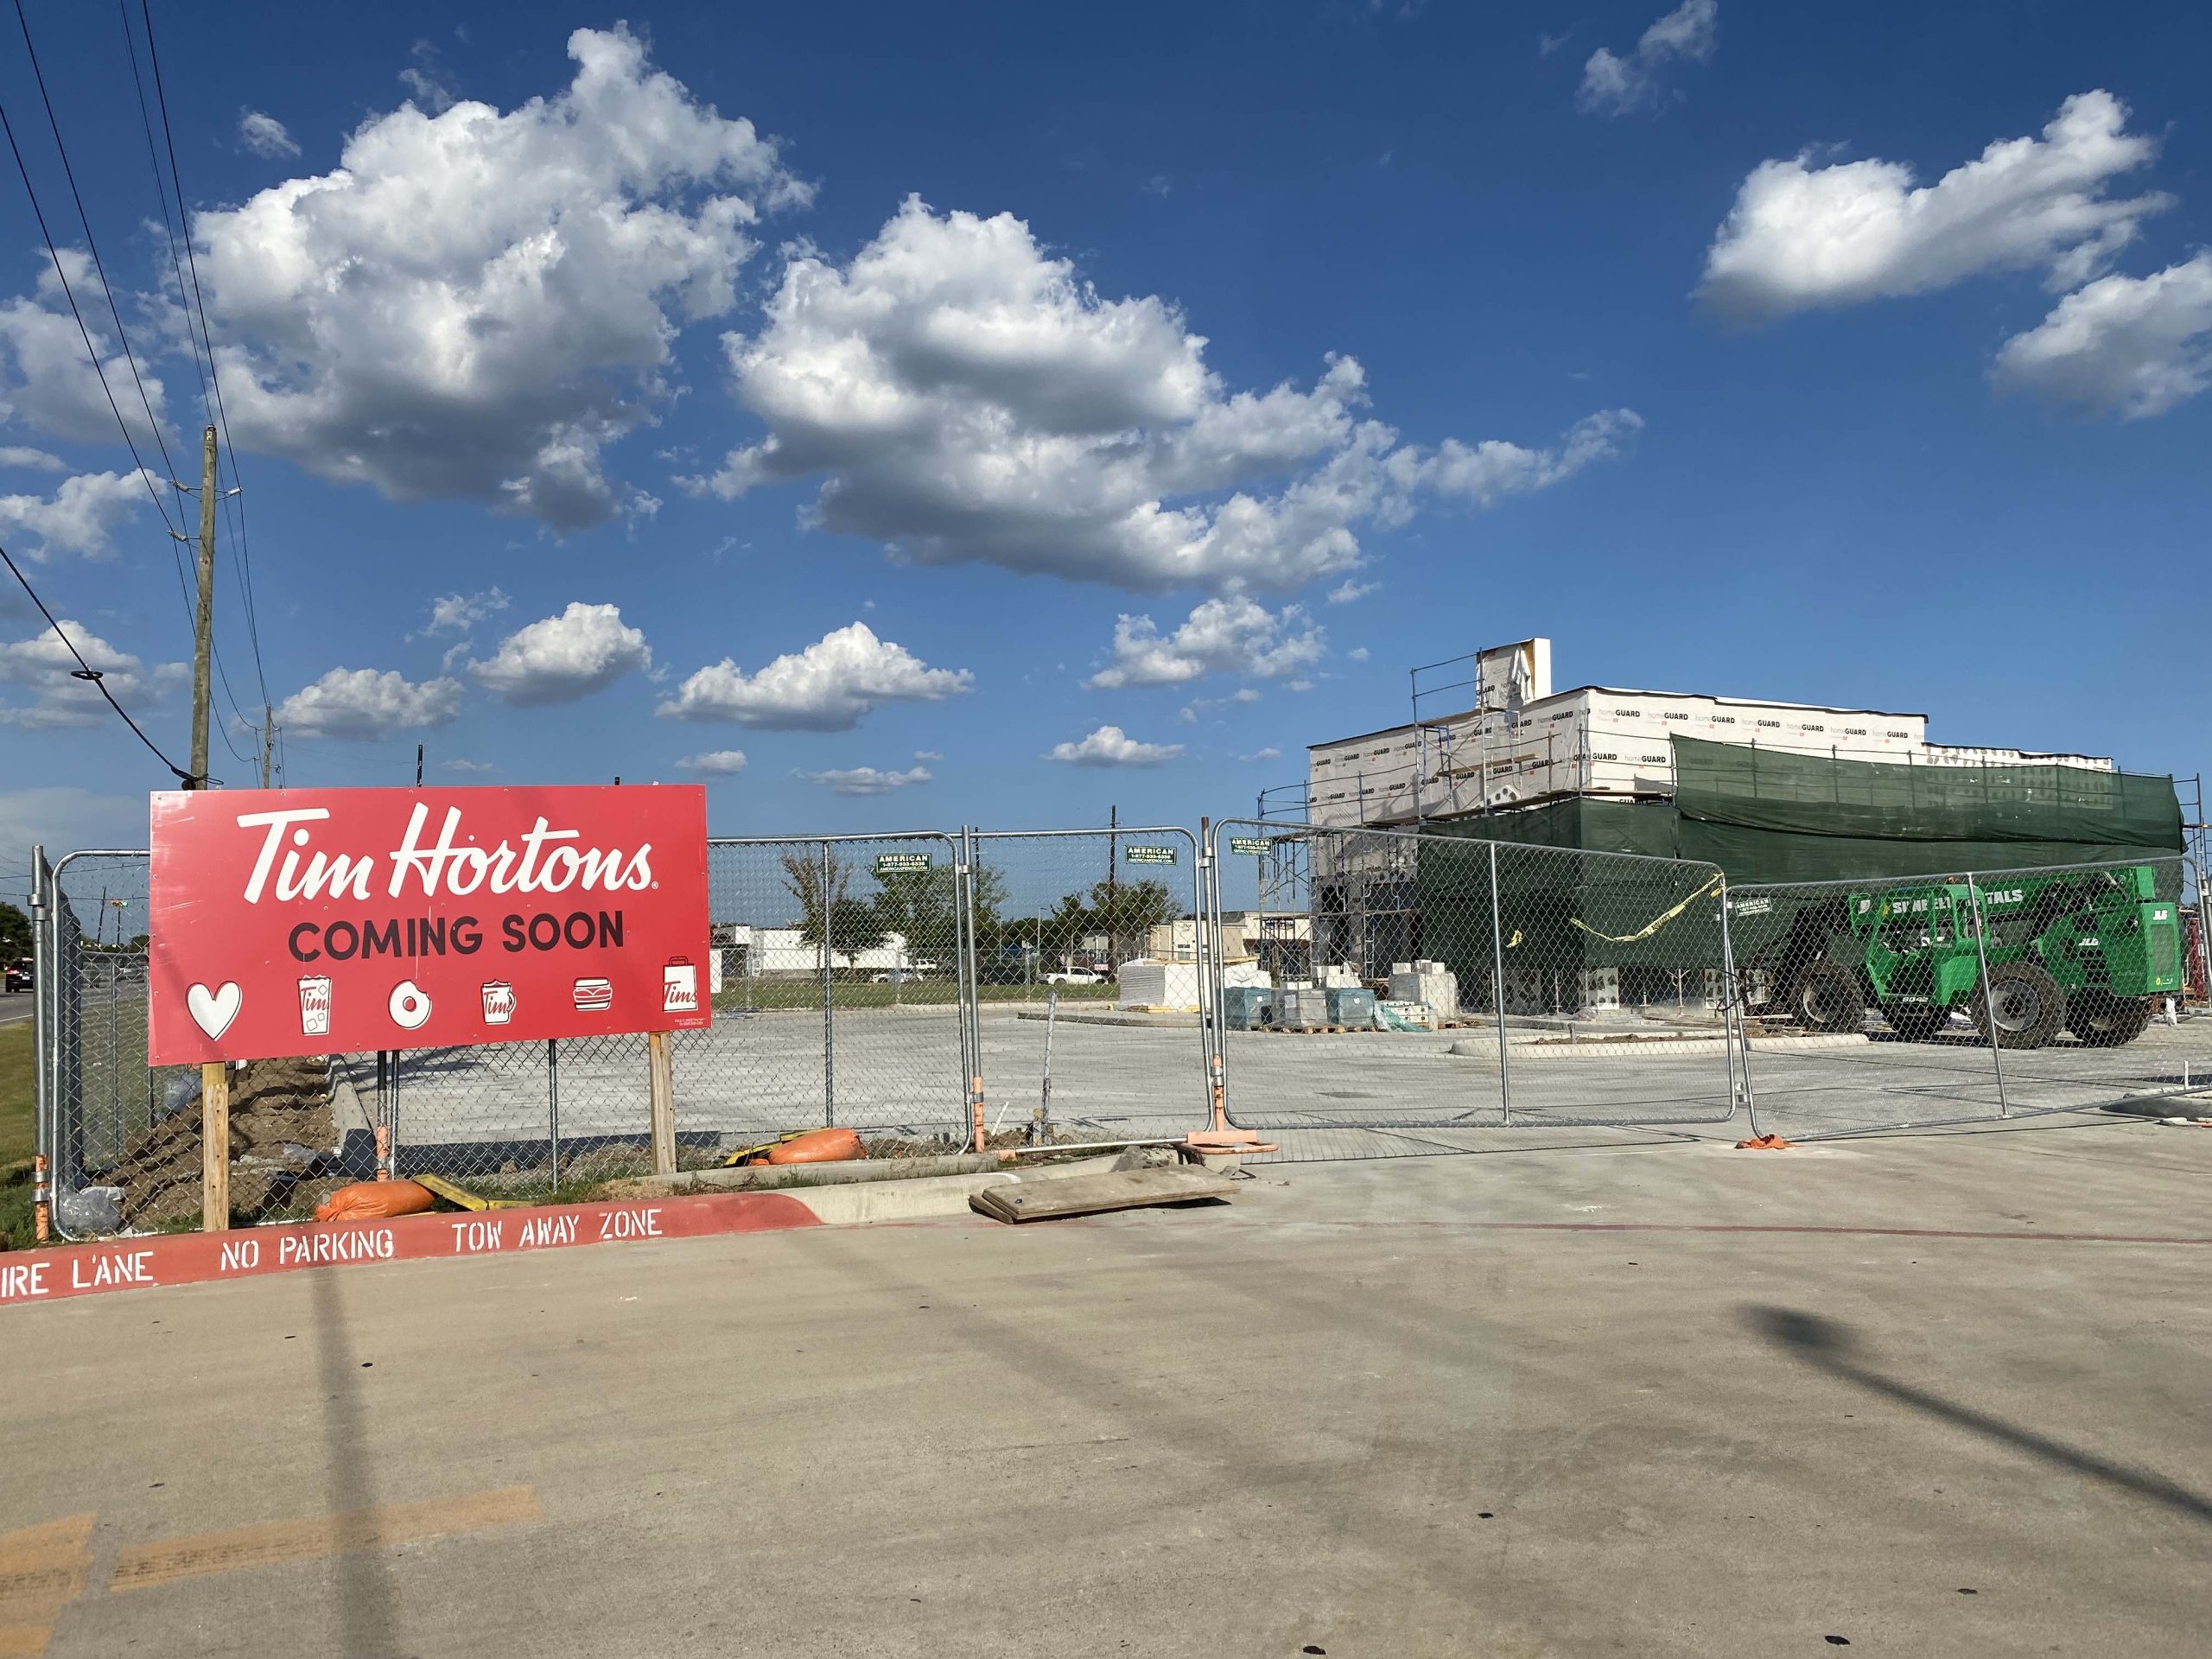 Tim Hortons to open new location near Lewisville - Cross Timbers